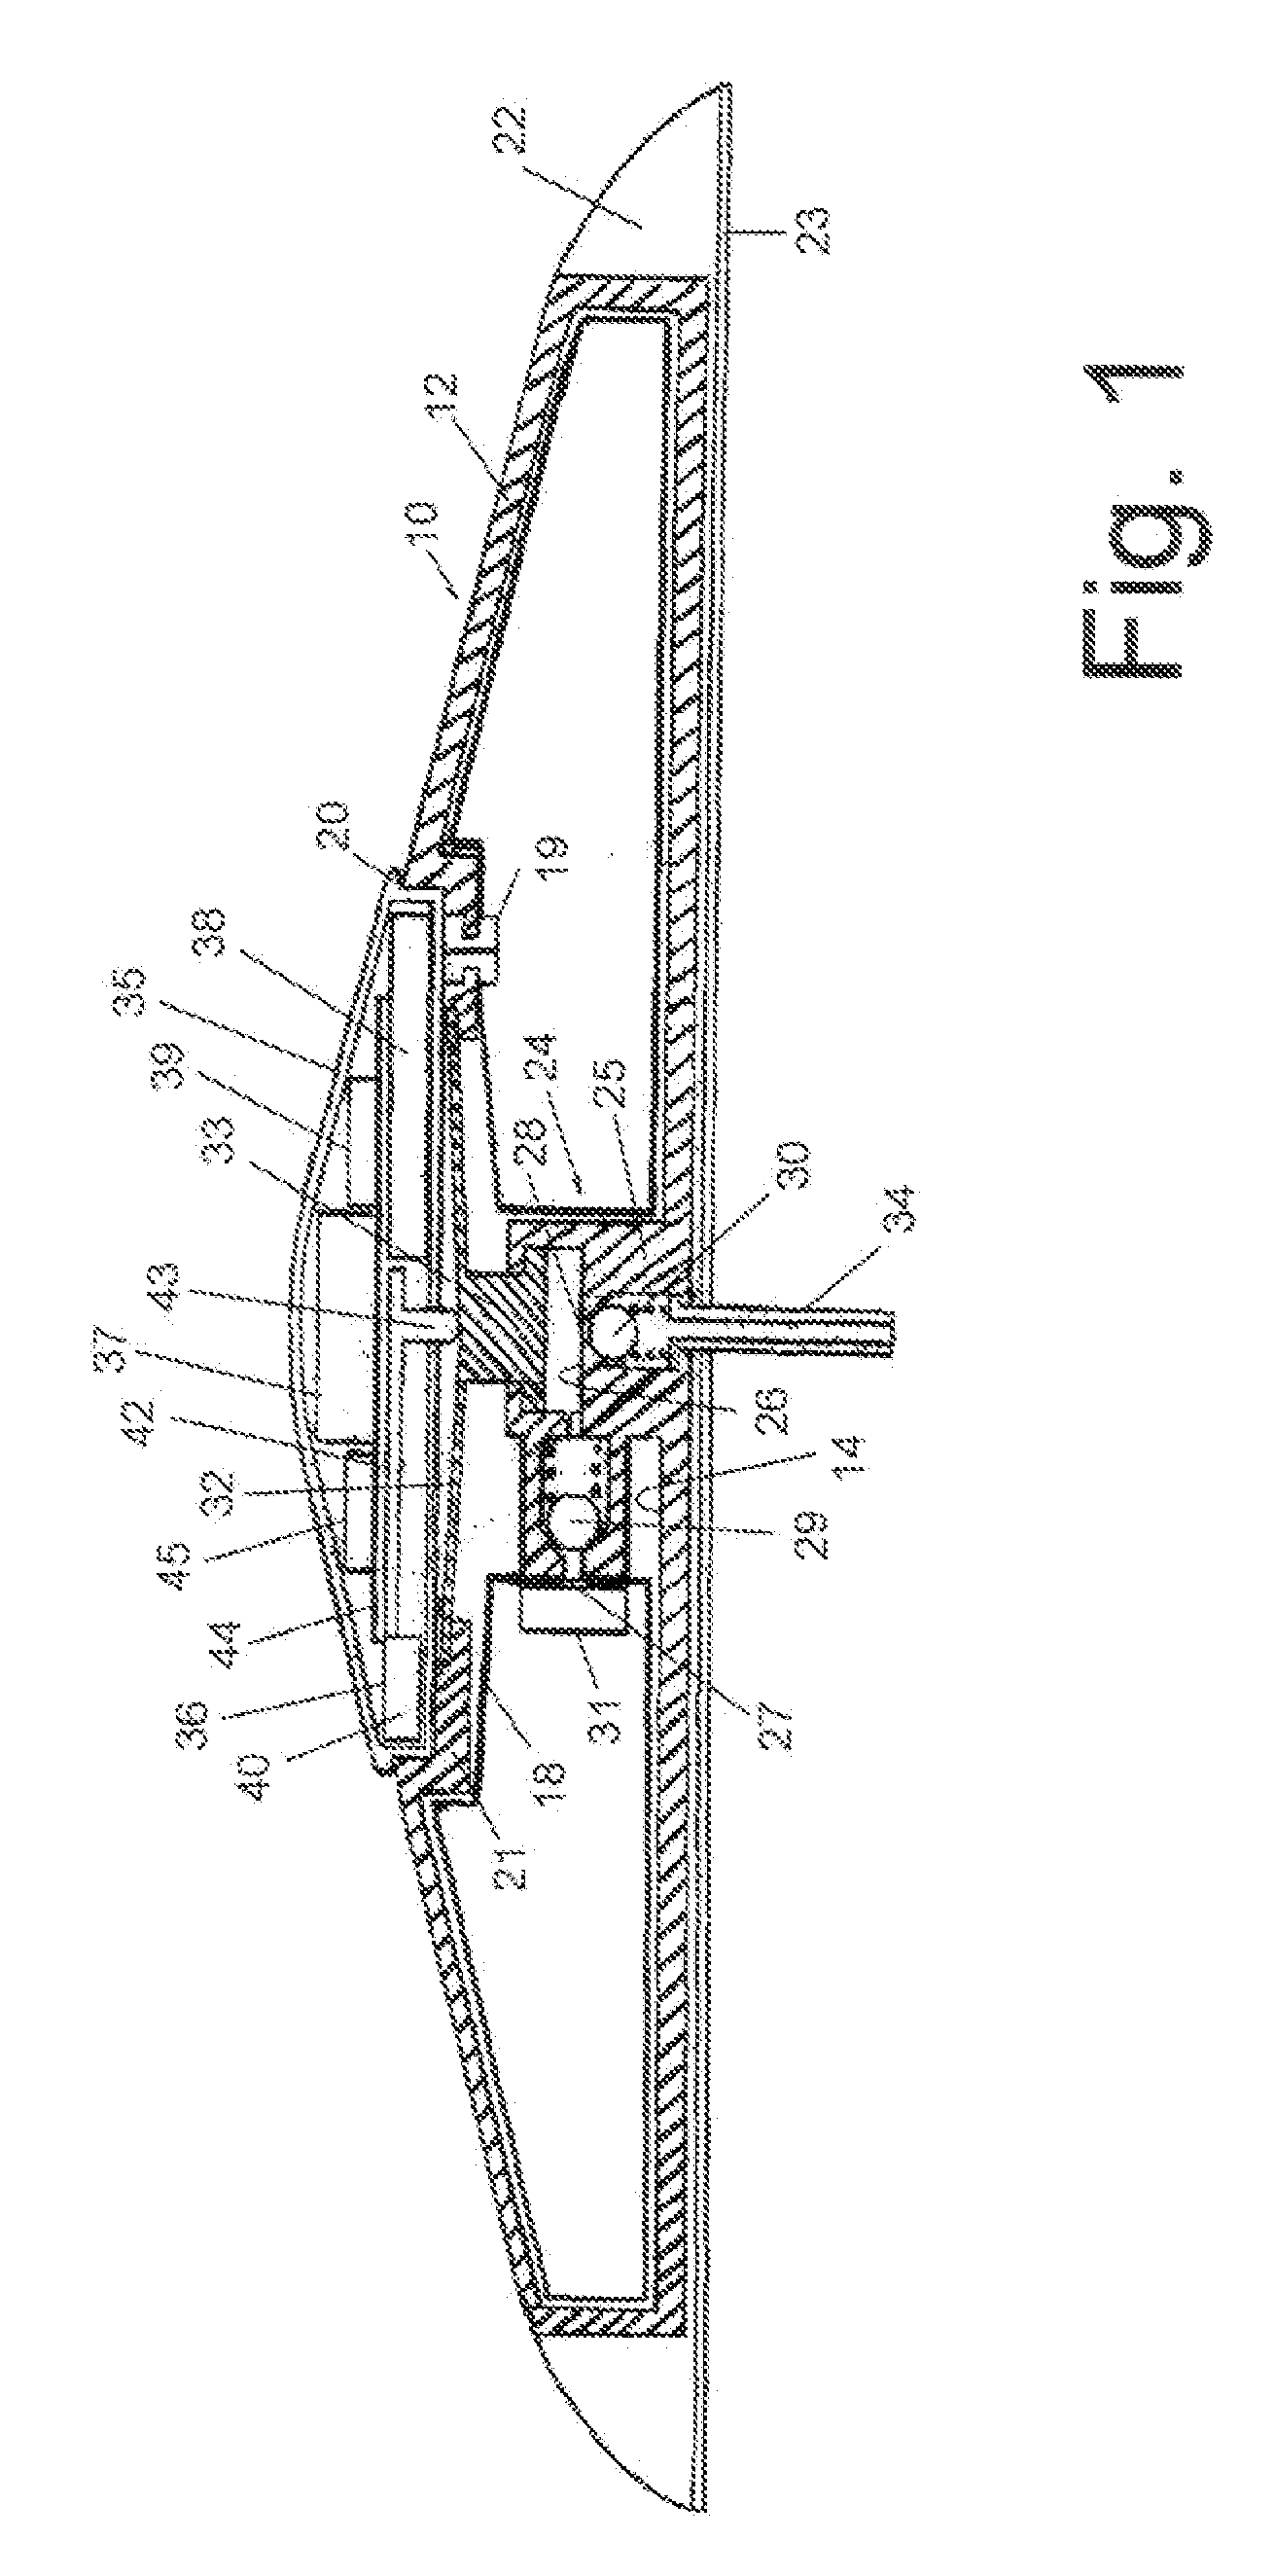 Method and apparatus for infusing liquid to a body